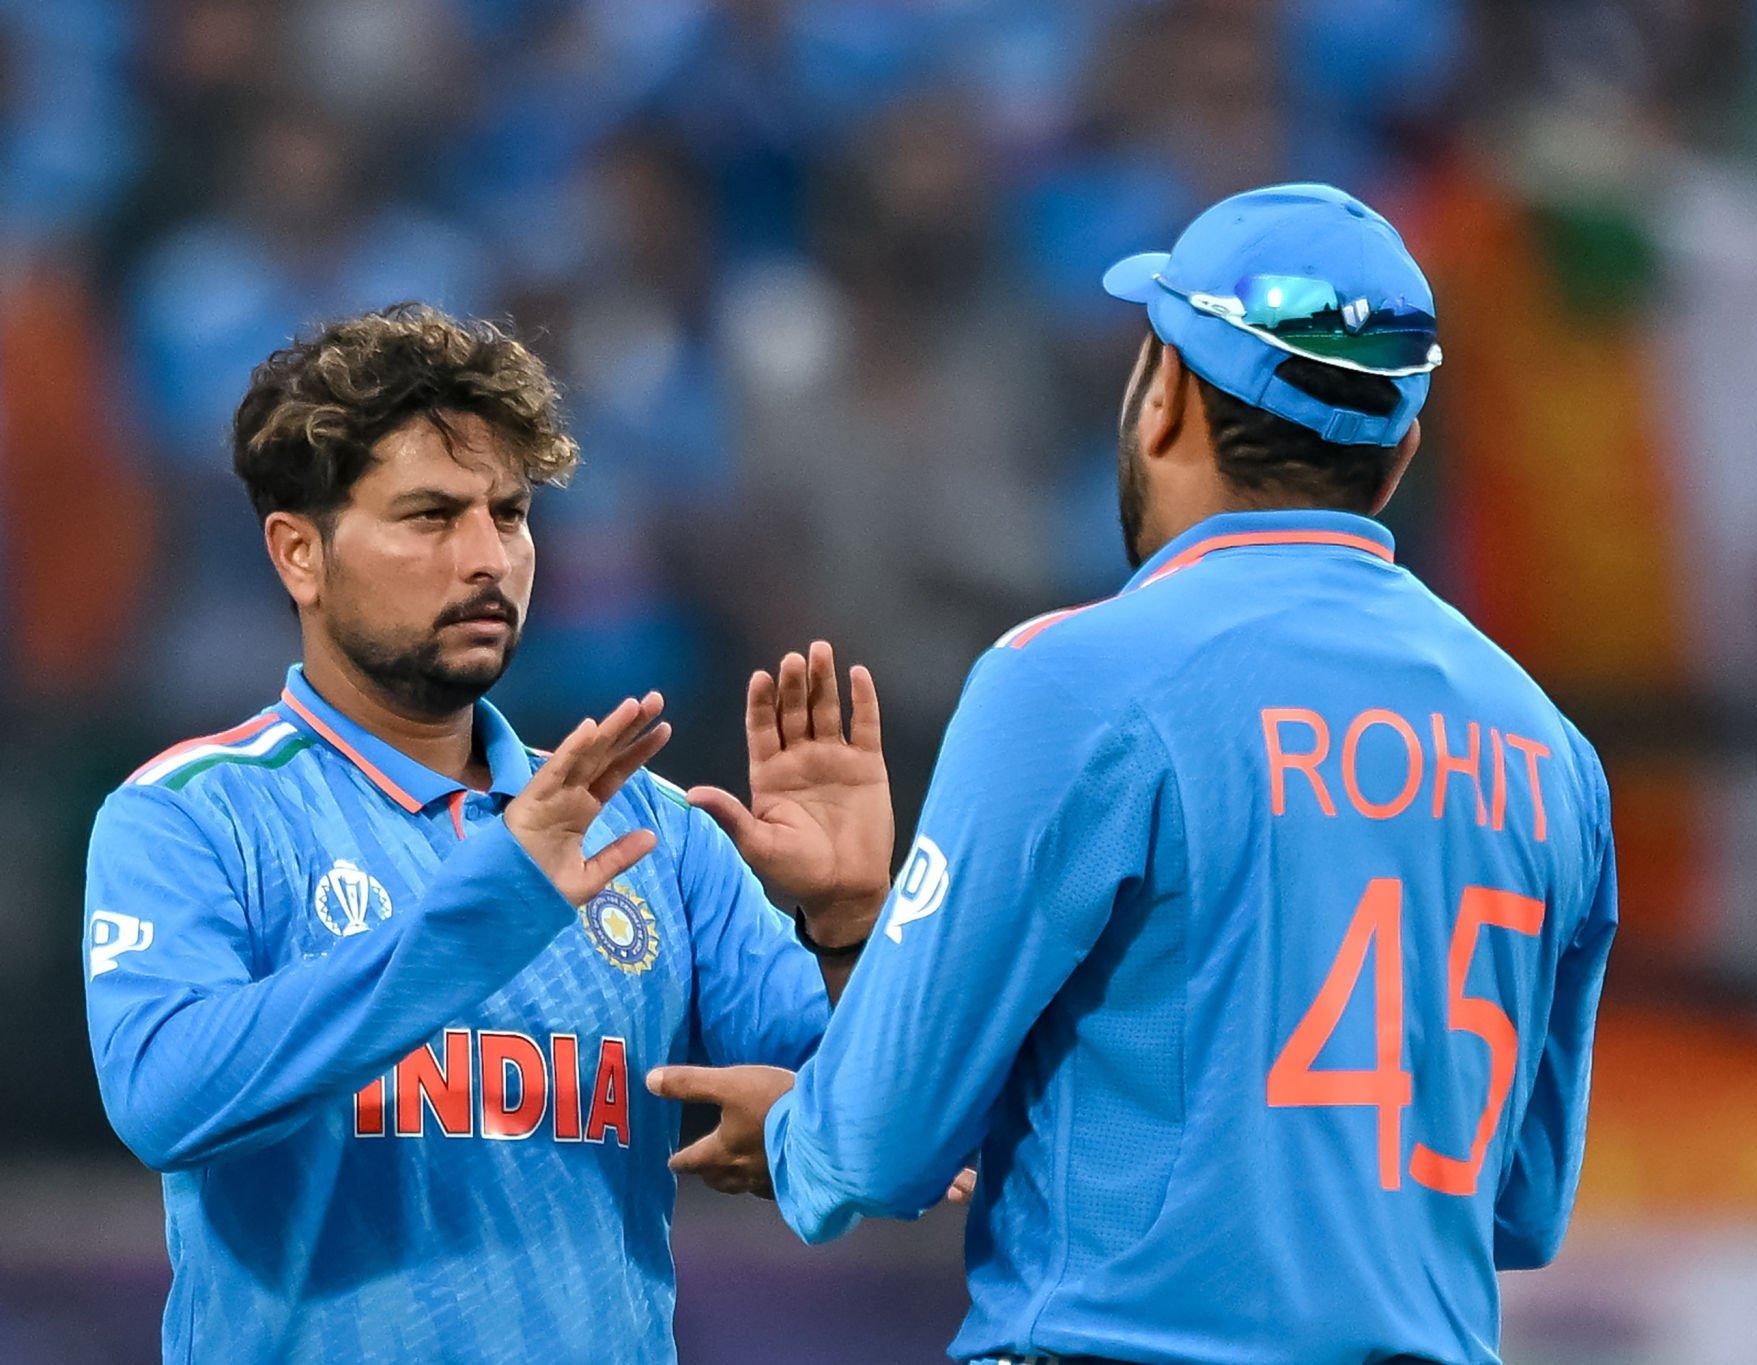 ICC Cricket World Cup 2023: [WATCH] Kuldeep Yadav’s Heated Exchange With Rohit Sharma During The Match Goes Viral